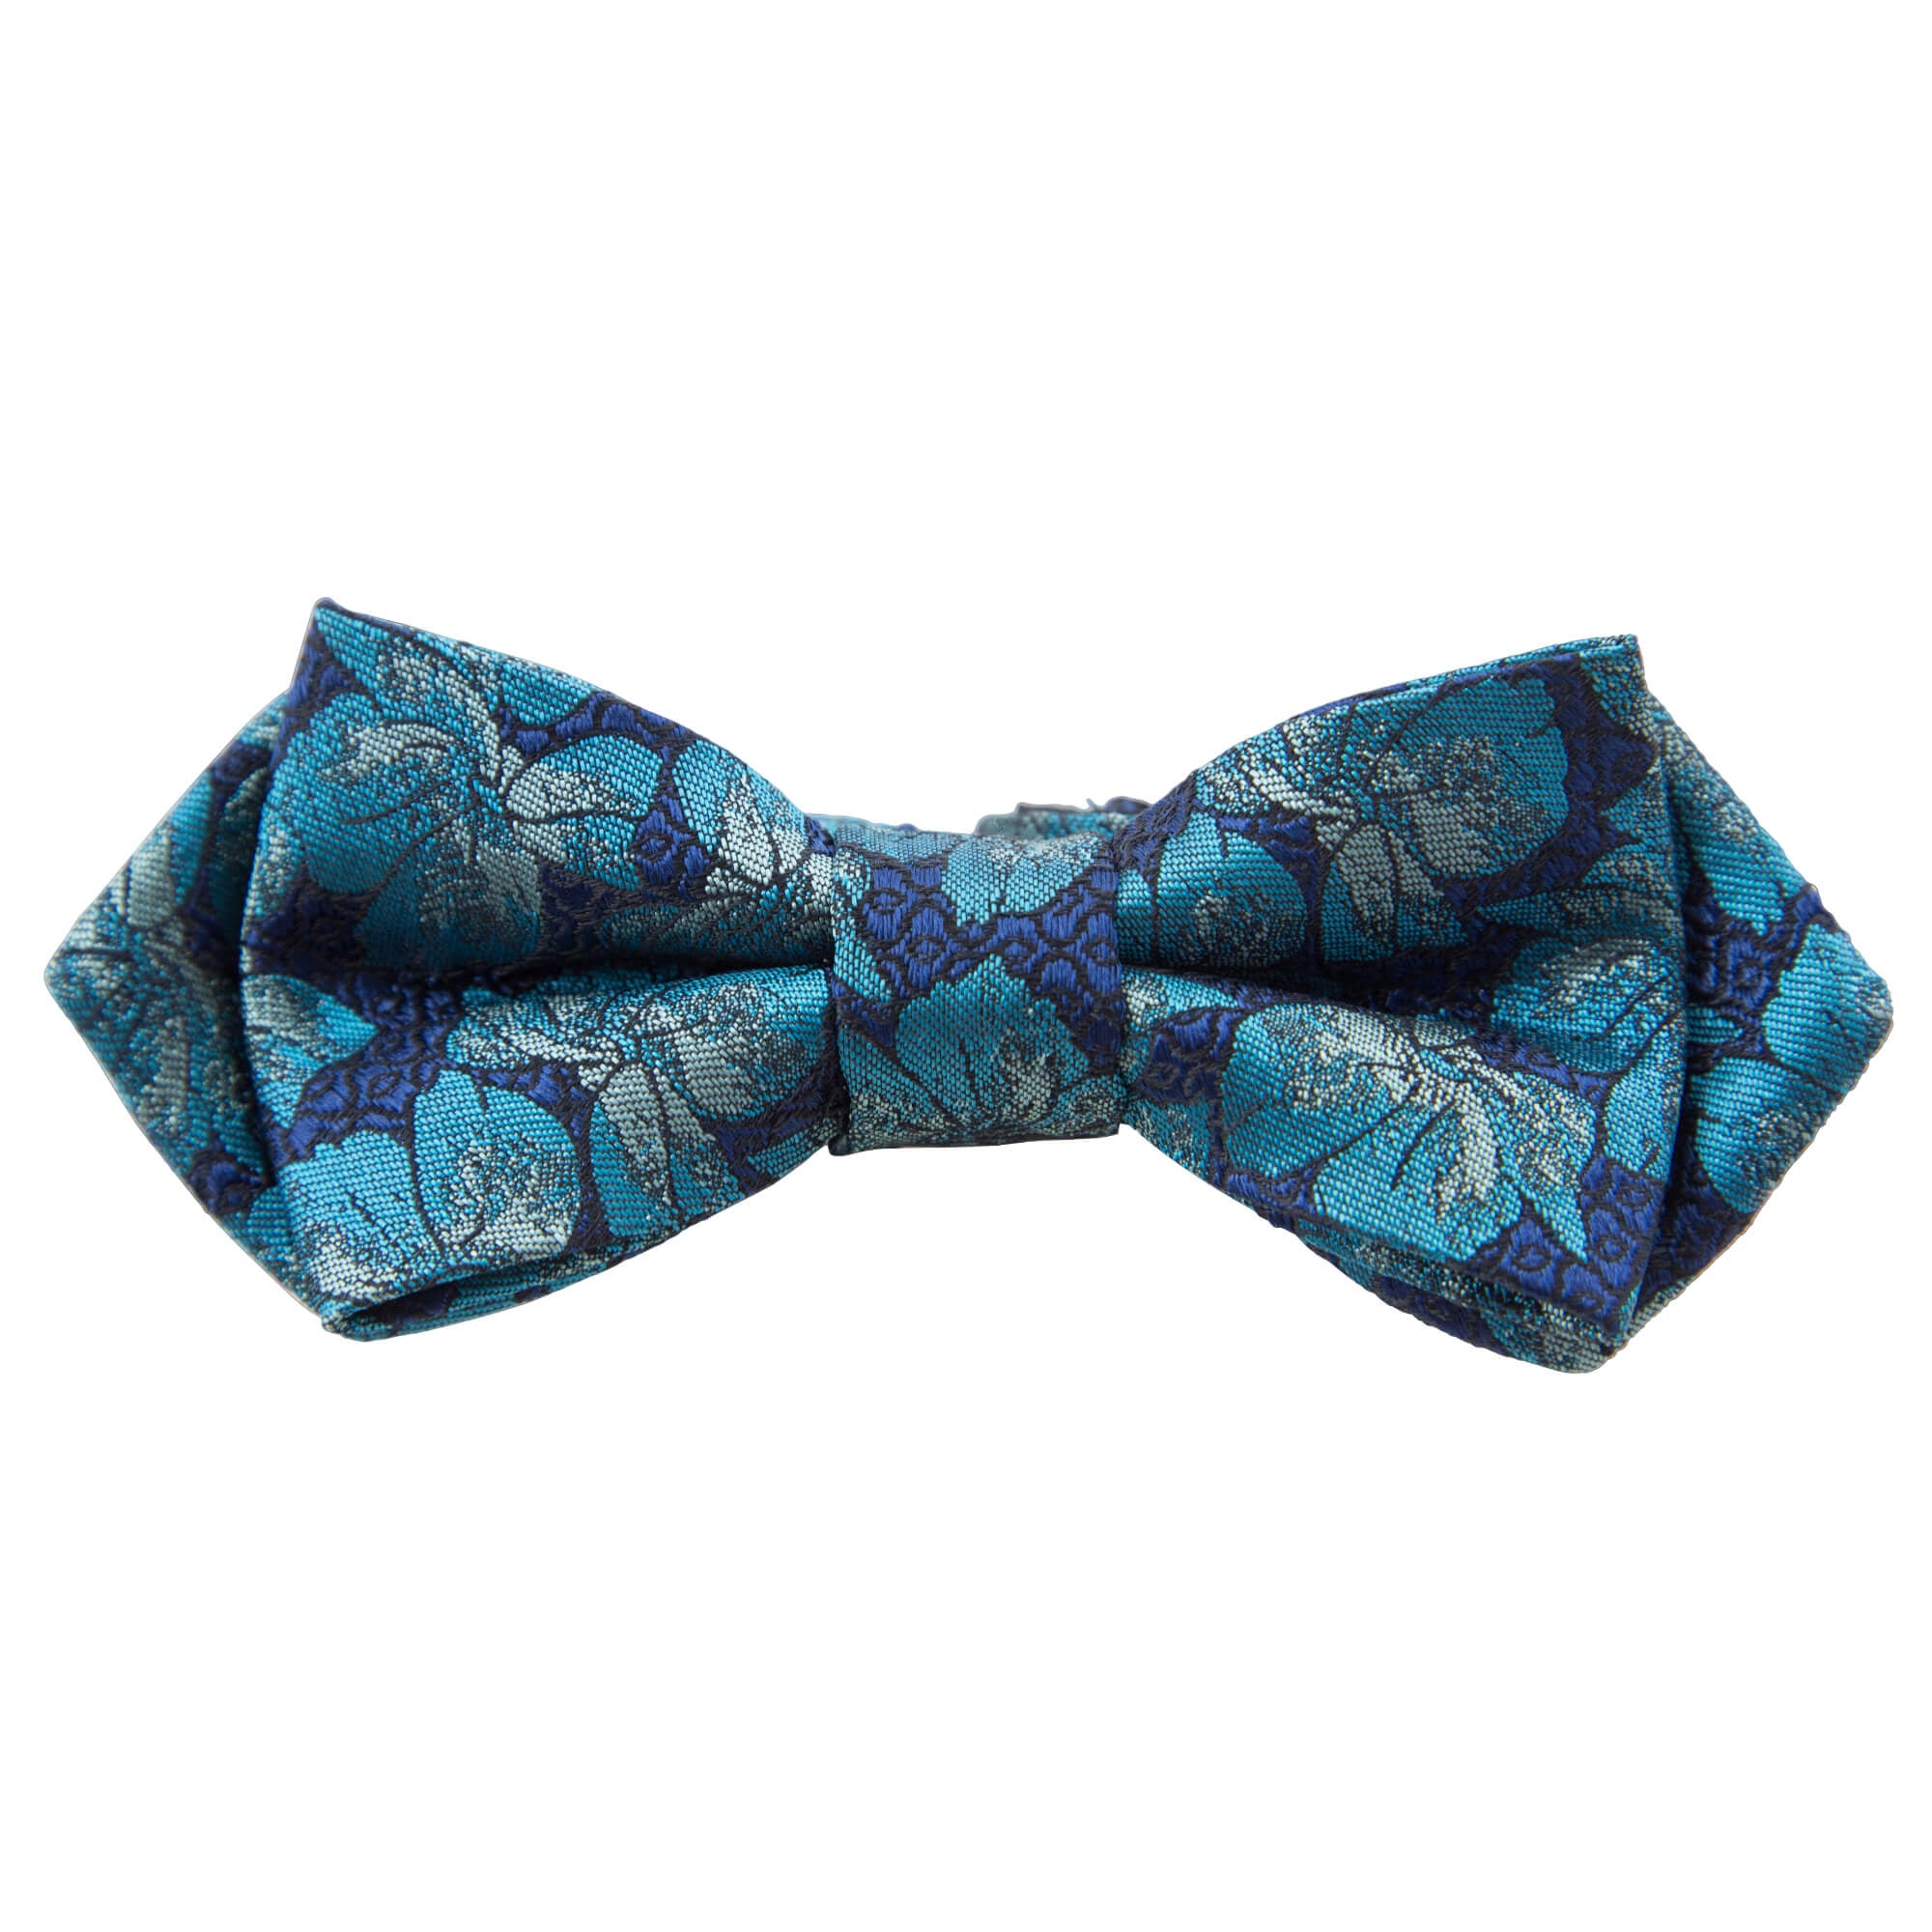 NAVY WITH CYAN FLOWERS BOW TIE